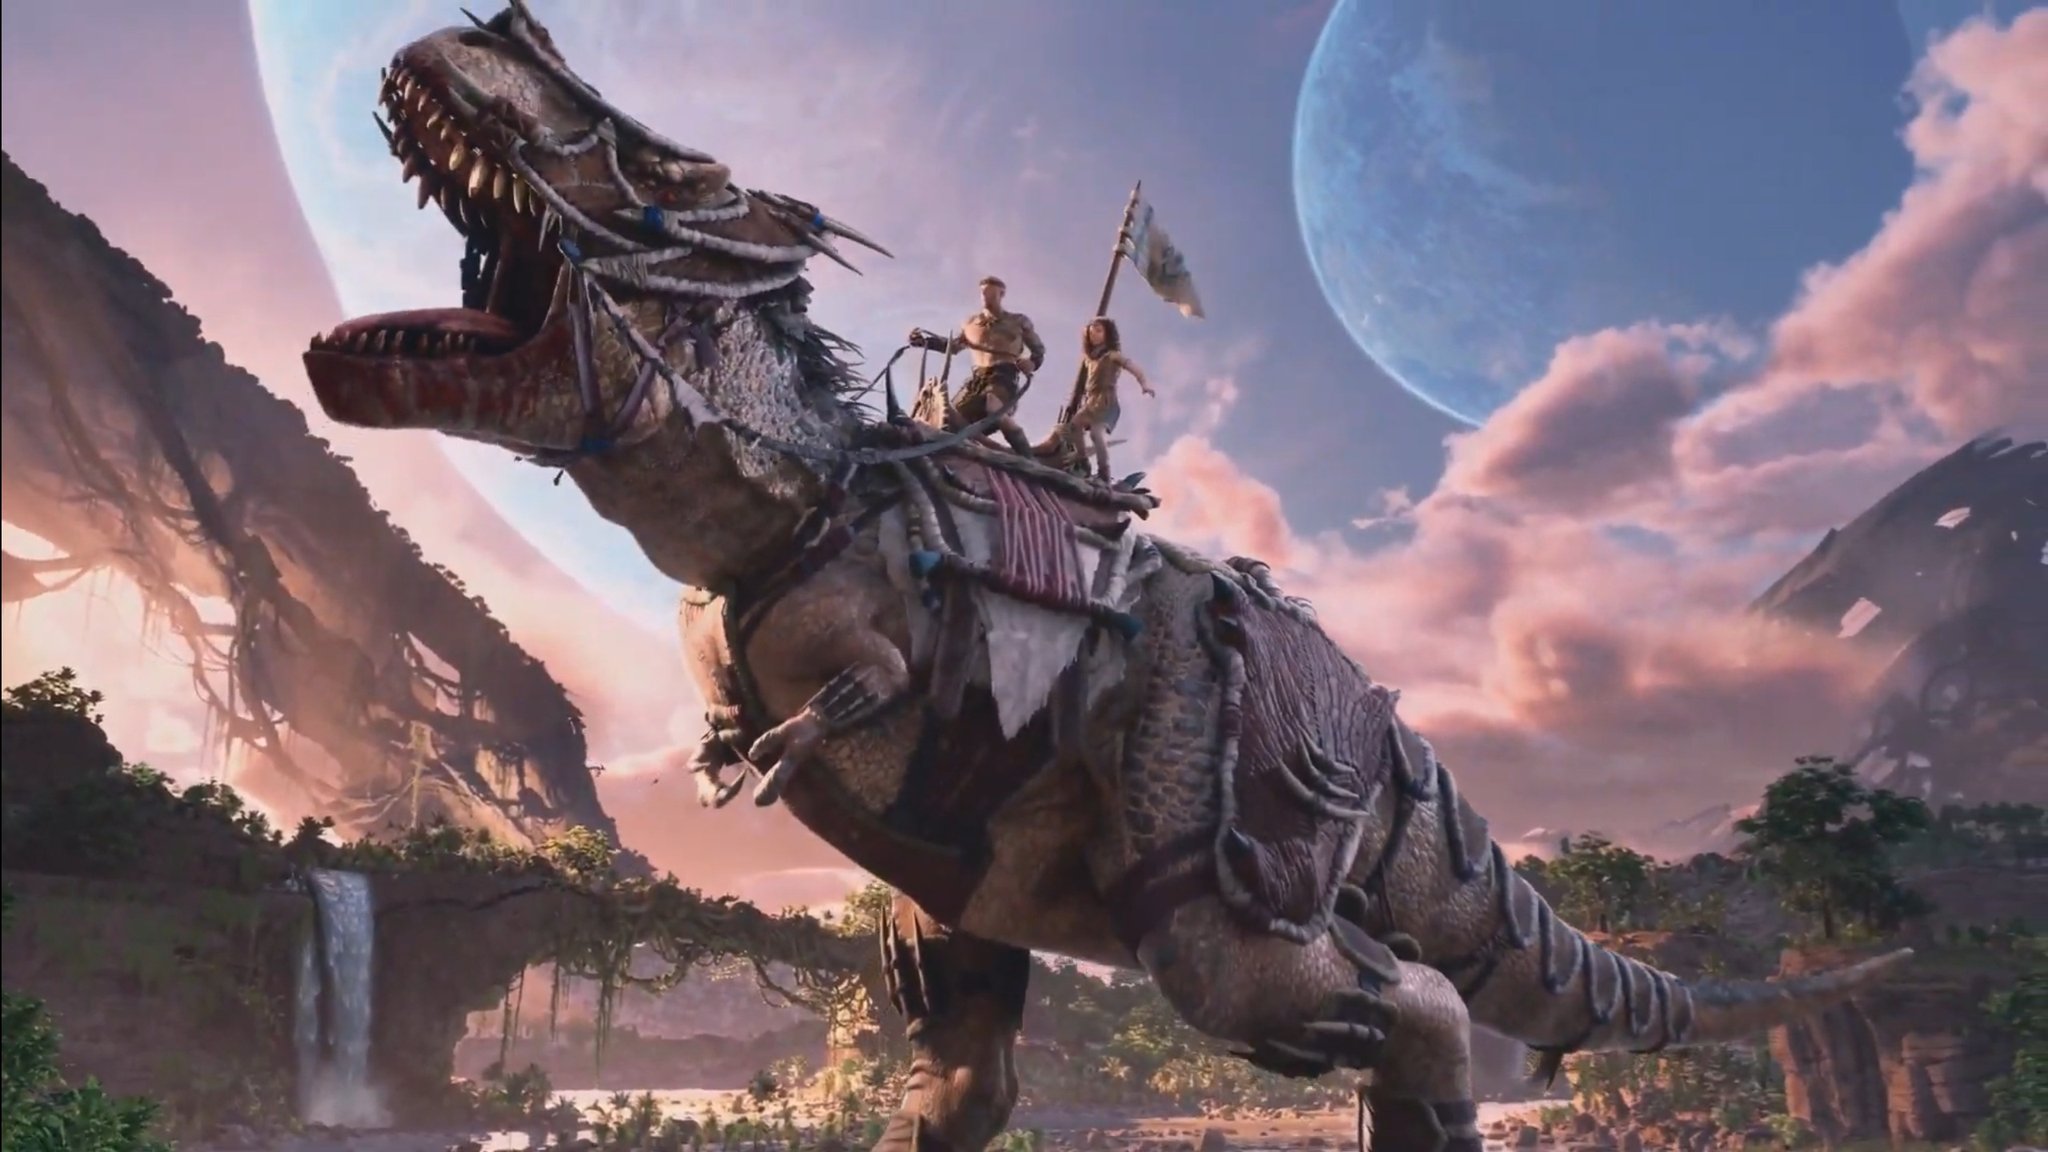 Ark II Starring Vin Diesel is a 2023 Console Launch Exclusive